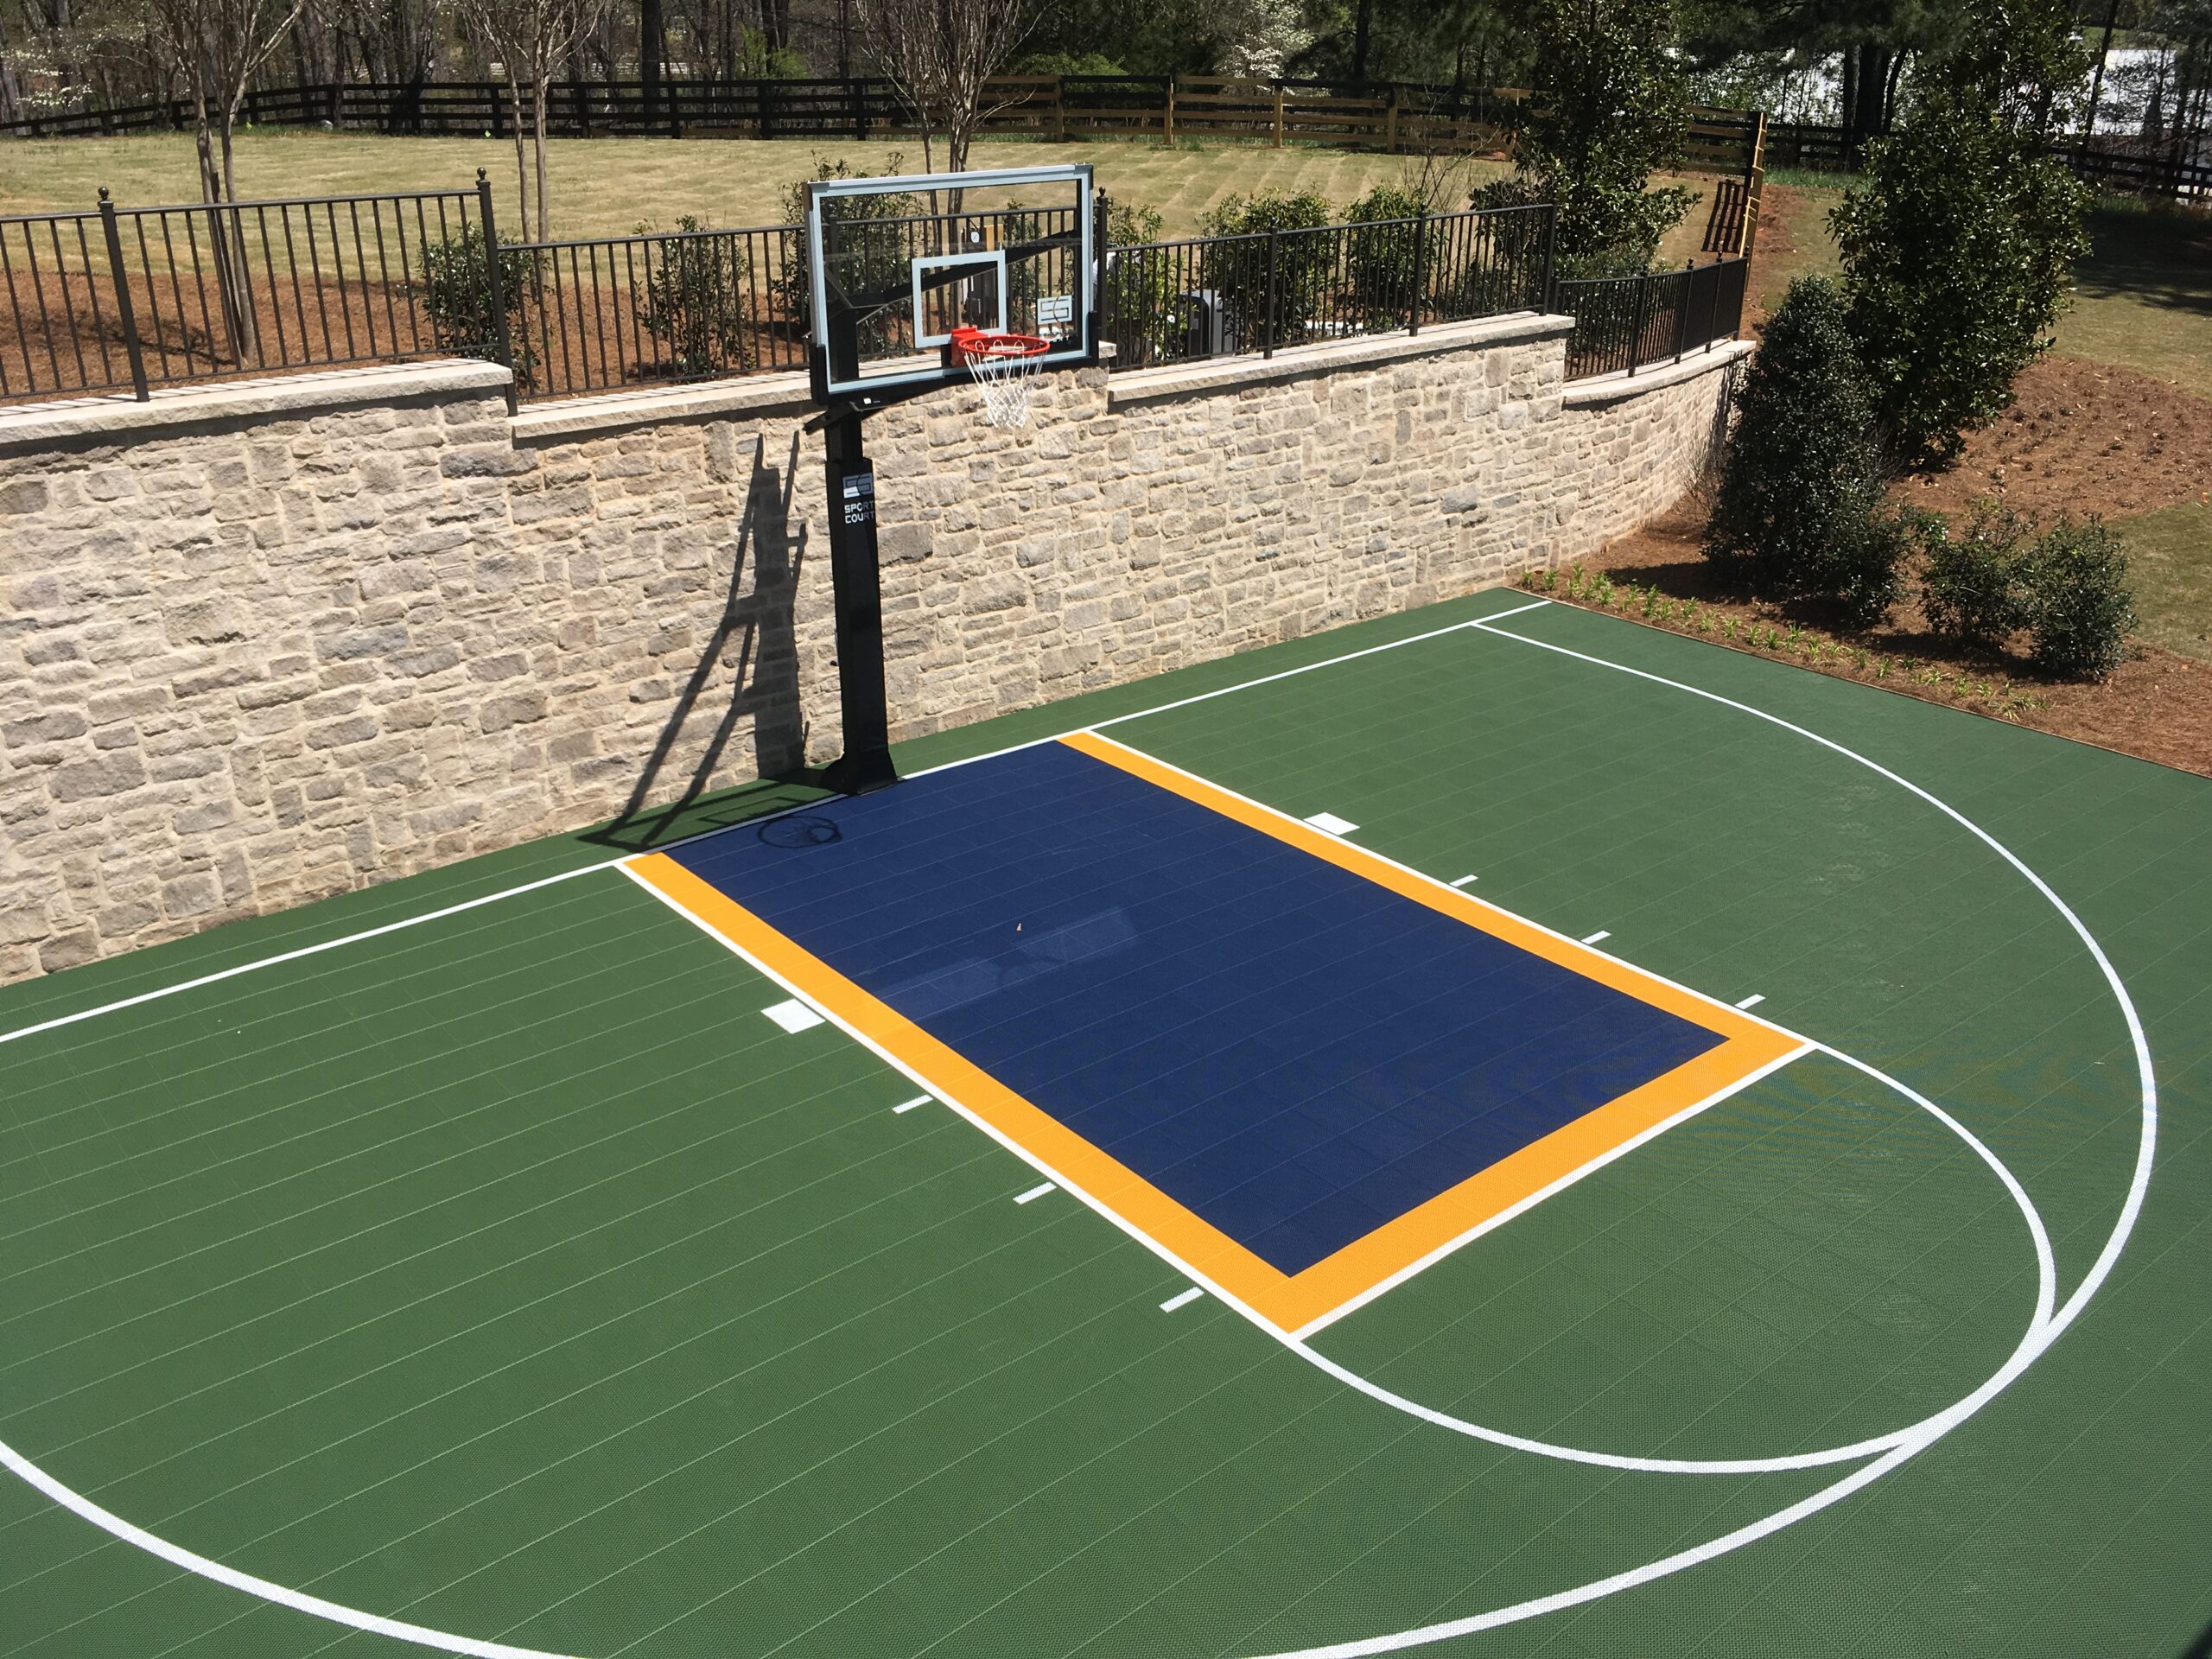 Outdoor residential court with green, yellow and blue court floor tiles.